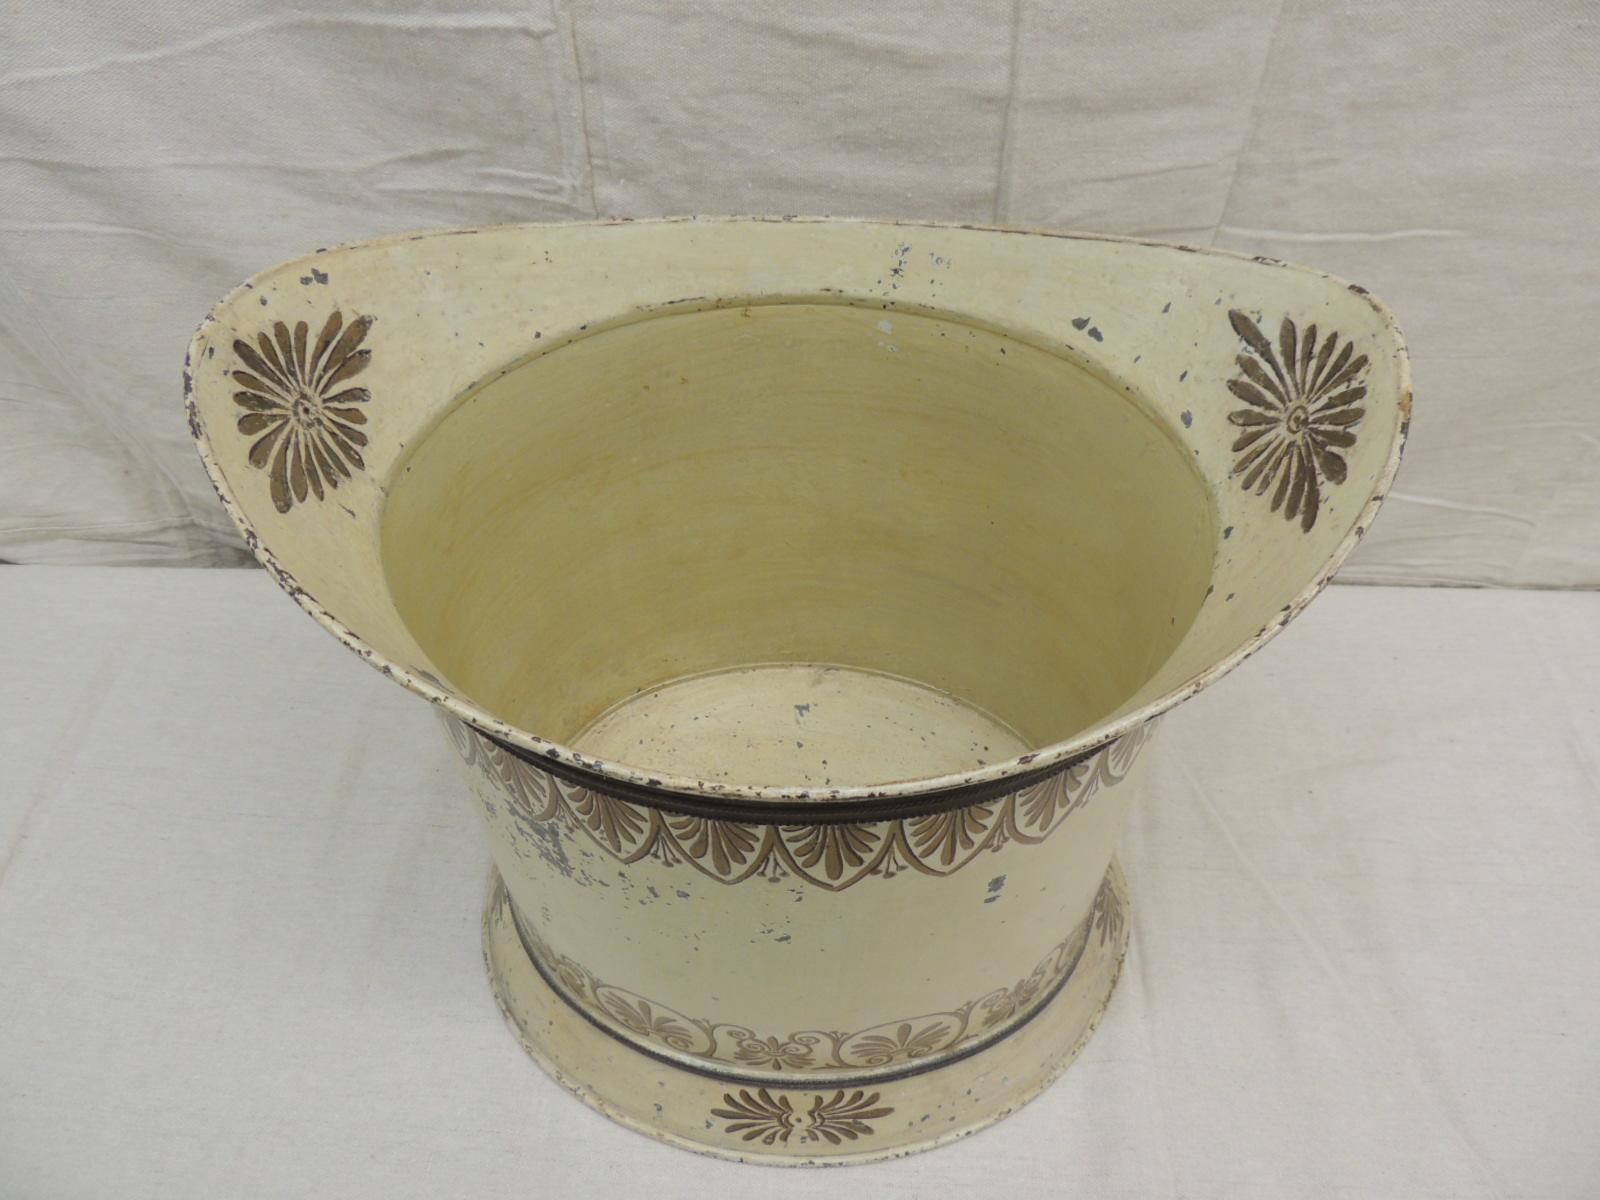 Regency Antique Tole Cream and Gold Wastebasket from The Collection of Villa Fiorentina